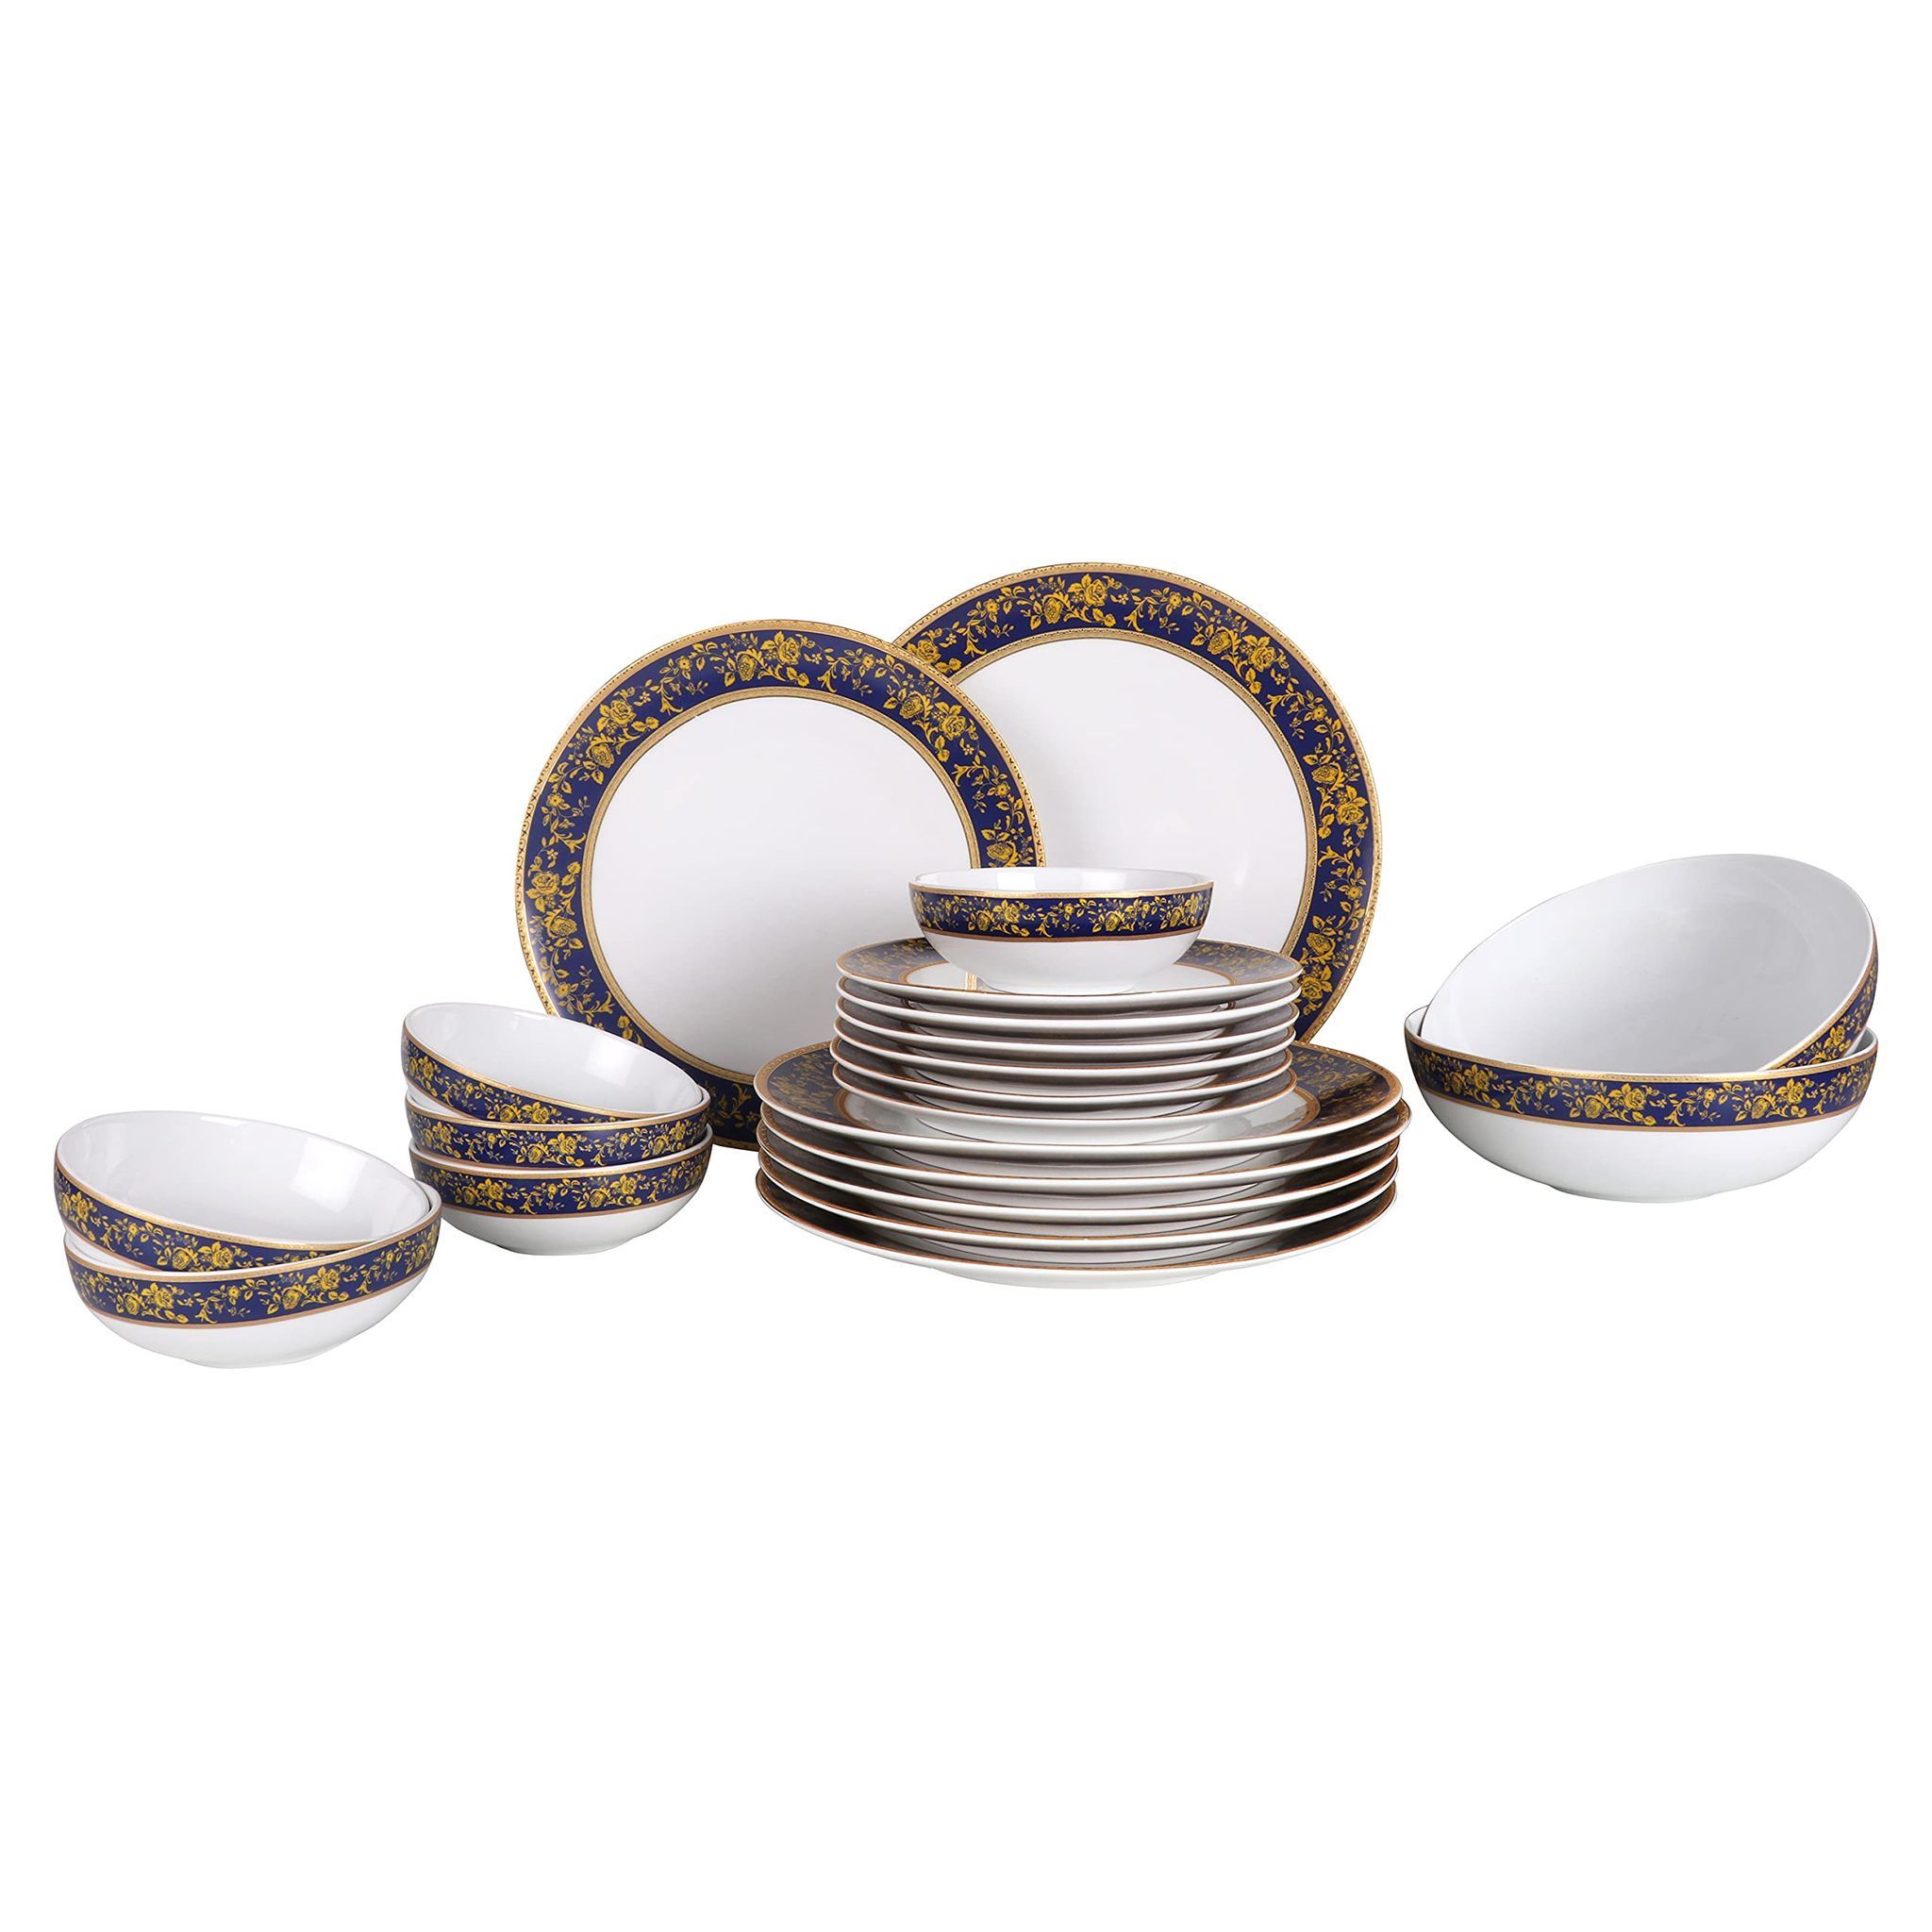 Hitkari Porcelain Summer Gold Dinner Set 21 Pcs.|Dinner Set for 6|Material: Porcelain|Luxury Dinnerware with Pure Gold Lining |for Home & Kitchen|White, Large